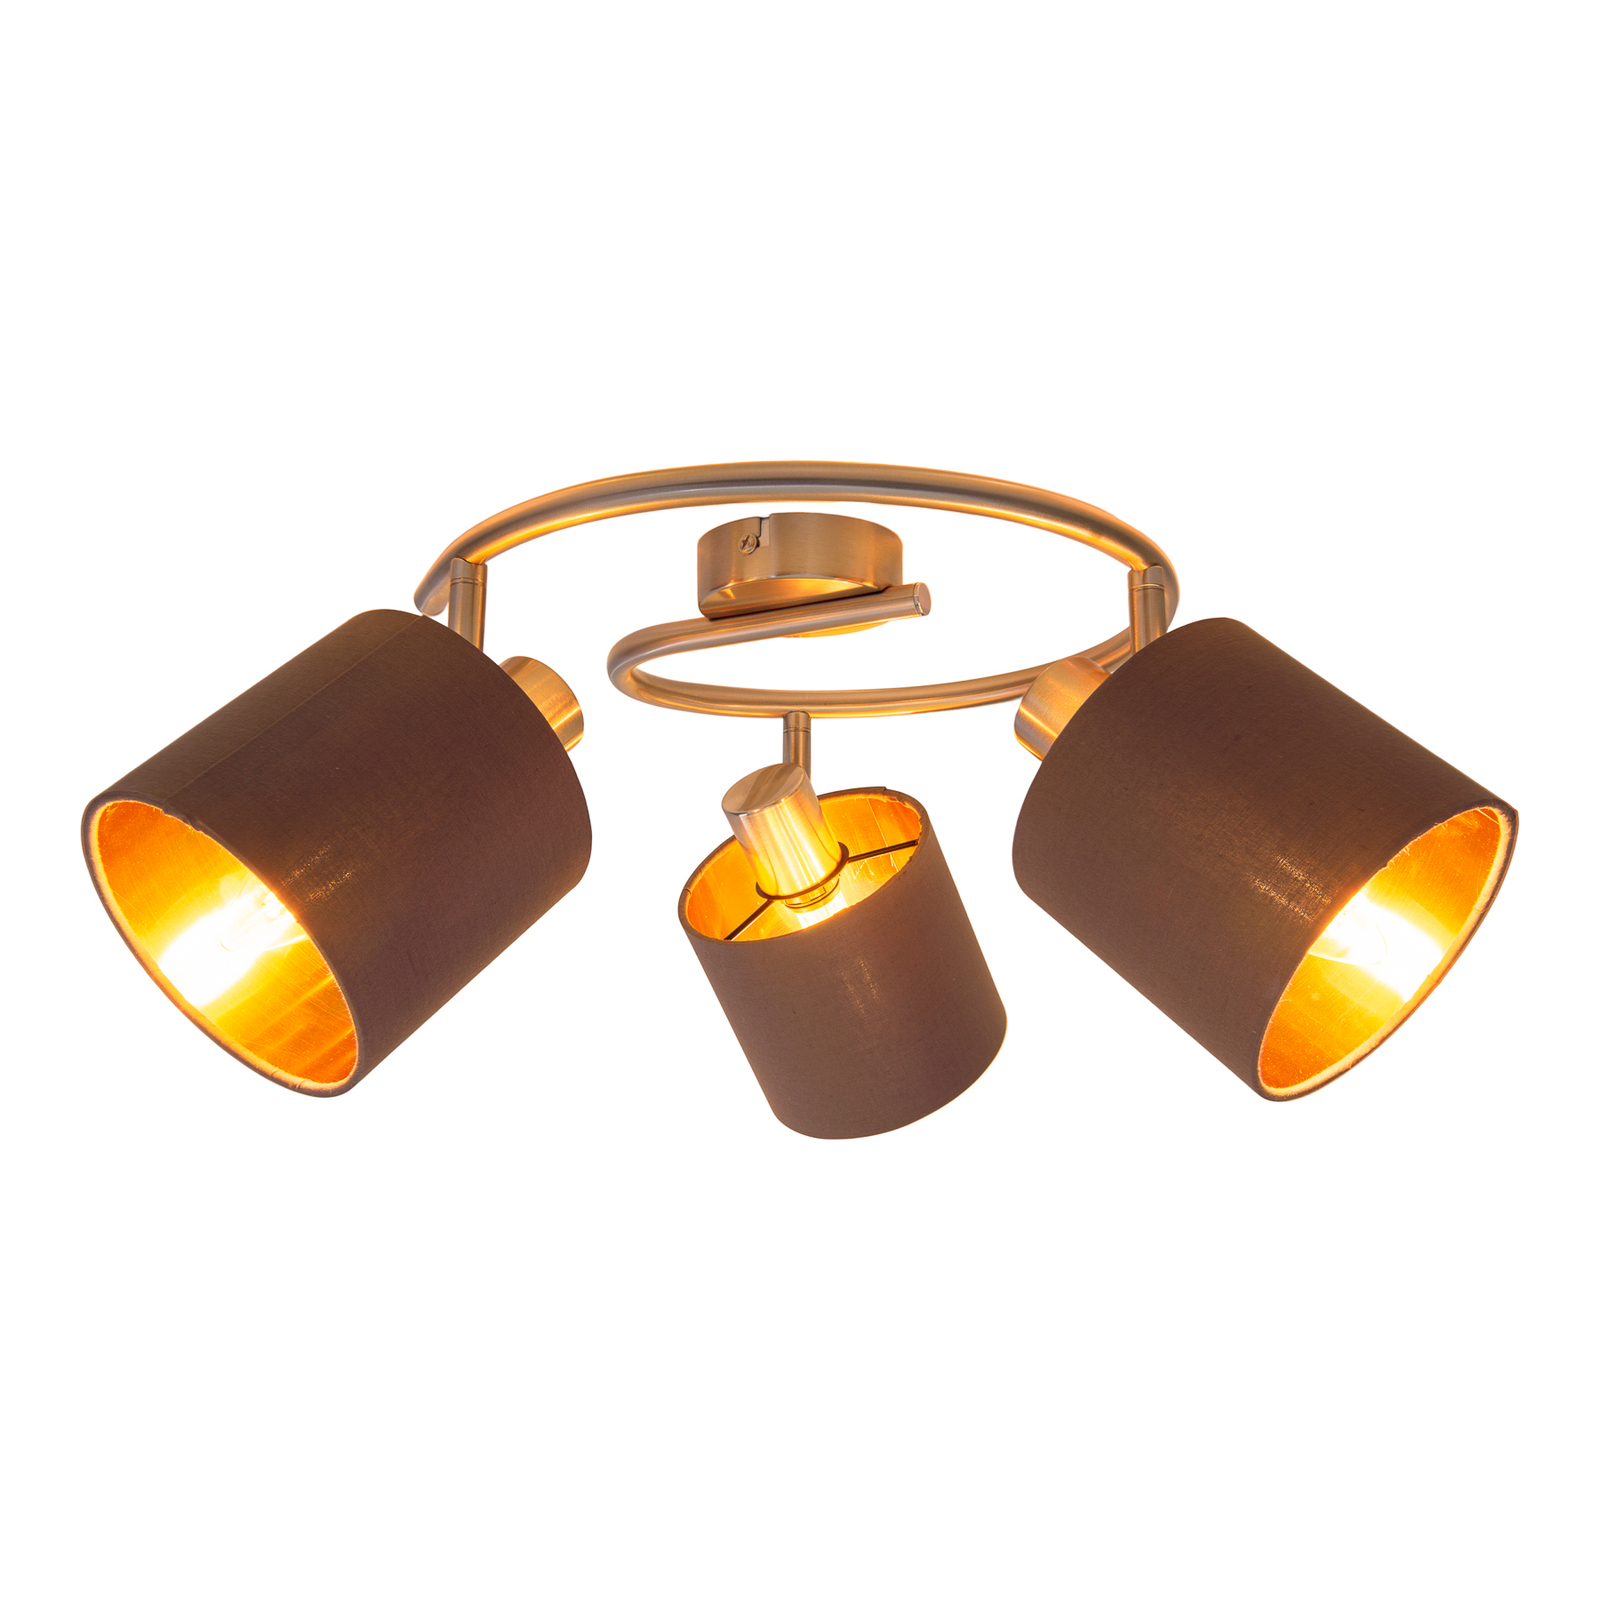 Maron ceiling light, 3-bulb, fabric, brown/gold